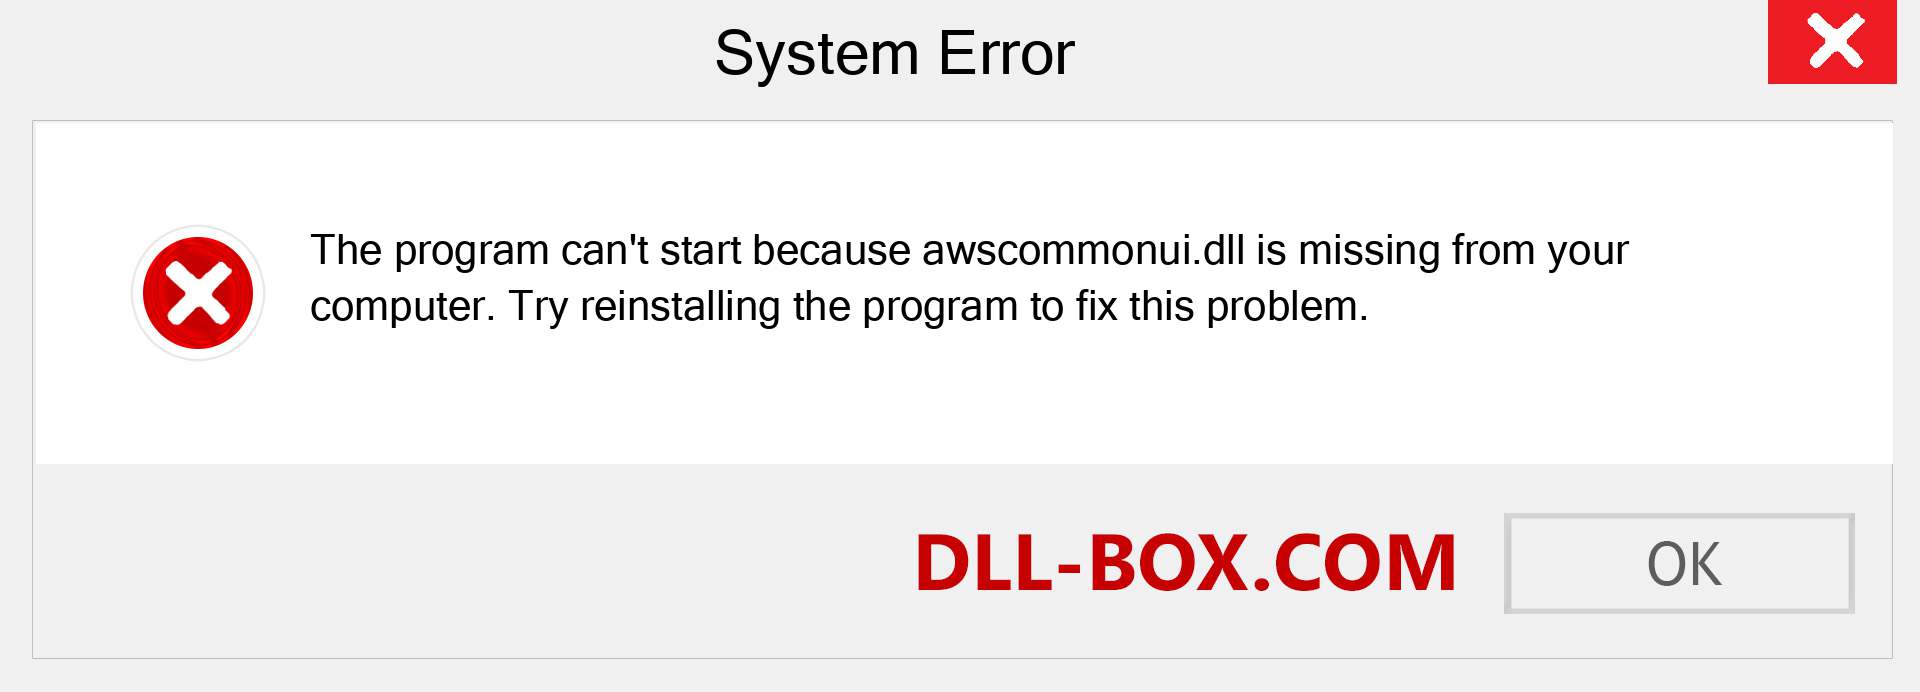  awscommonui.dll file is missing?. Download for Windows 7, 8, 10 - Fix  awscommonui dll Missing Error on Windows, photos, images